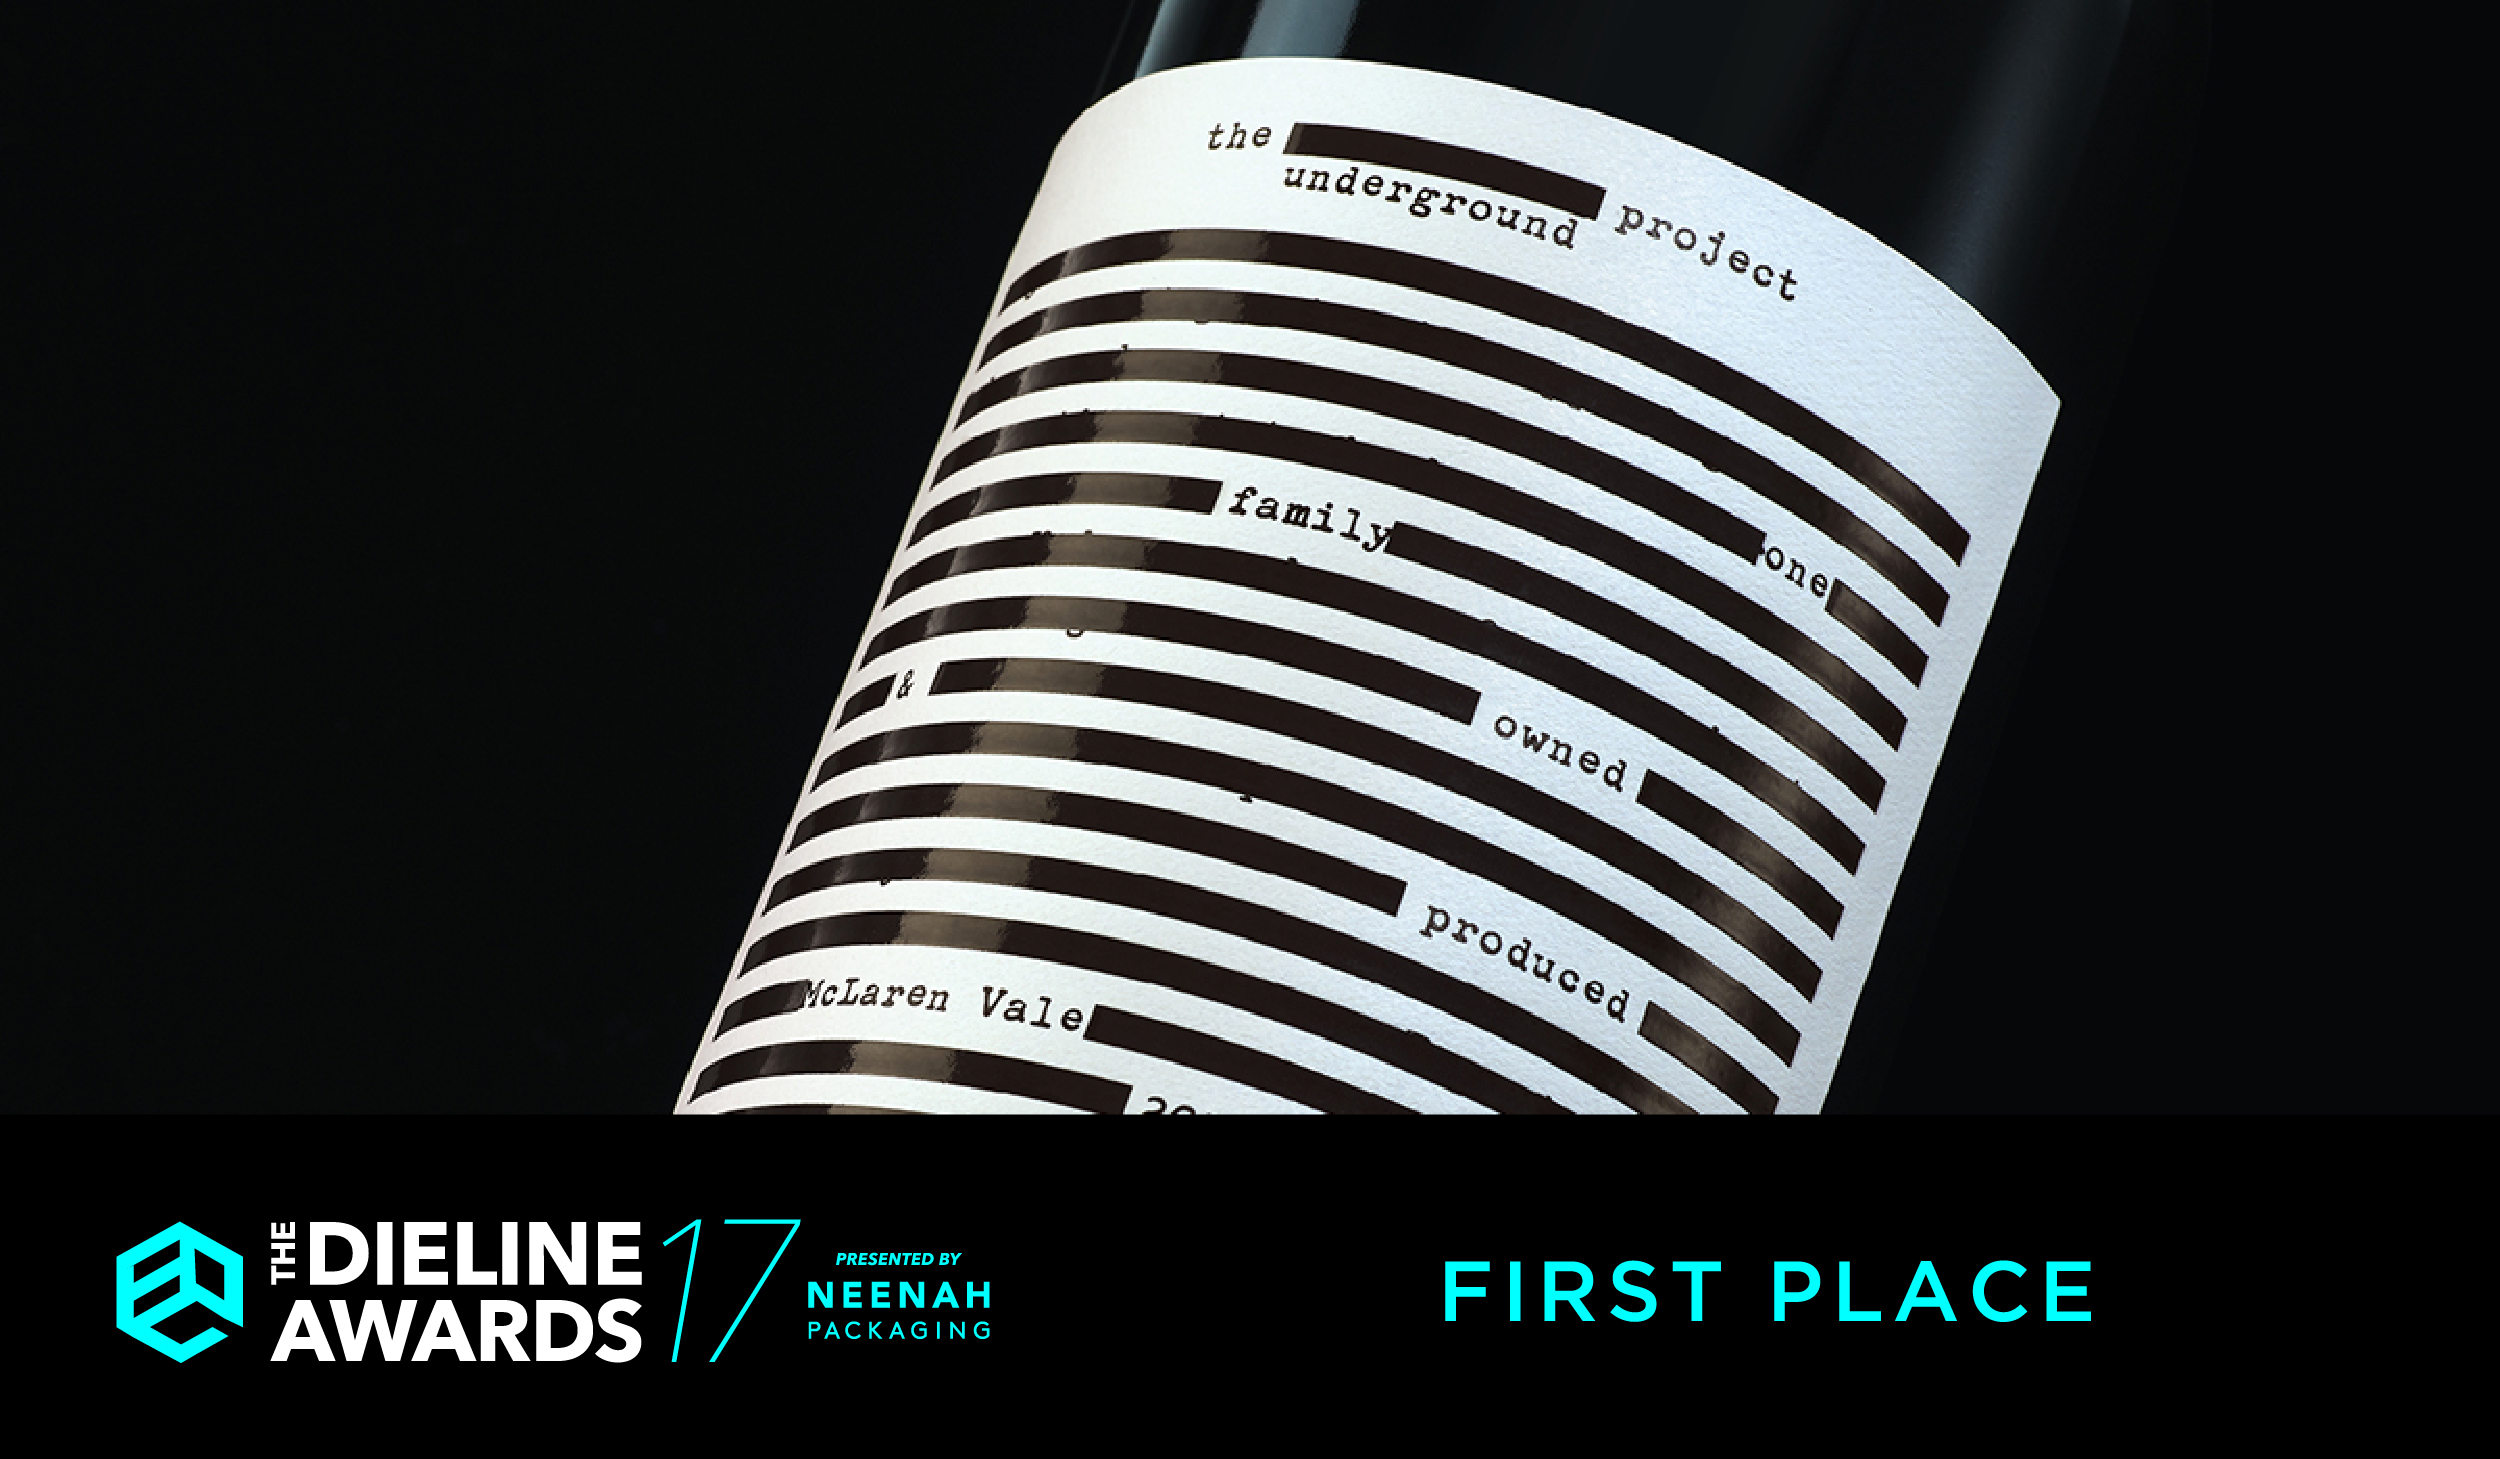 The Dieline Awards 2017: The Underground Project Wines